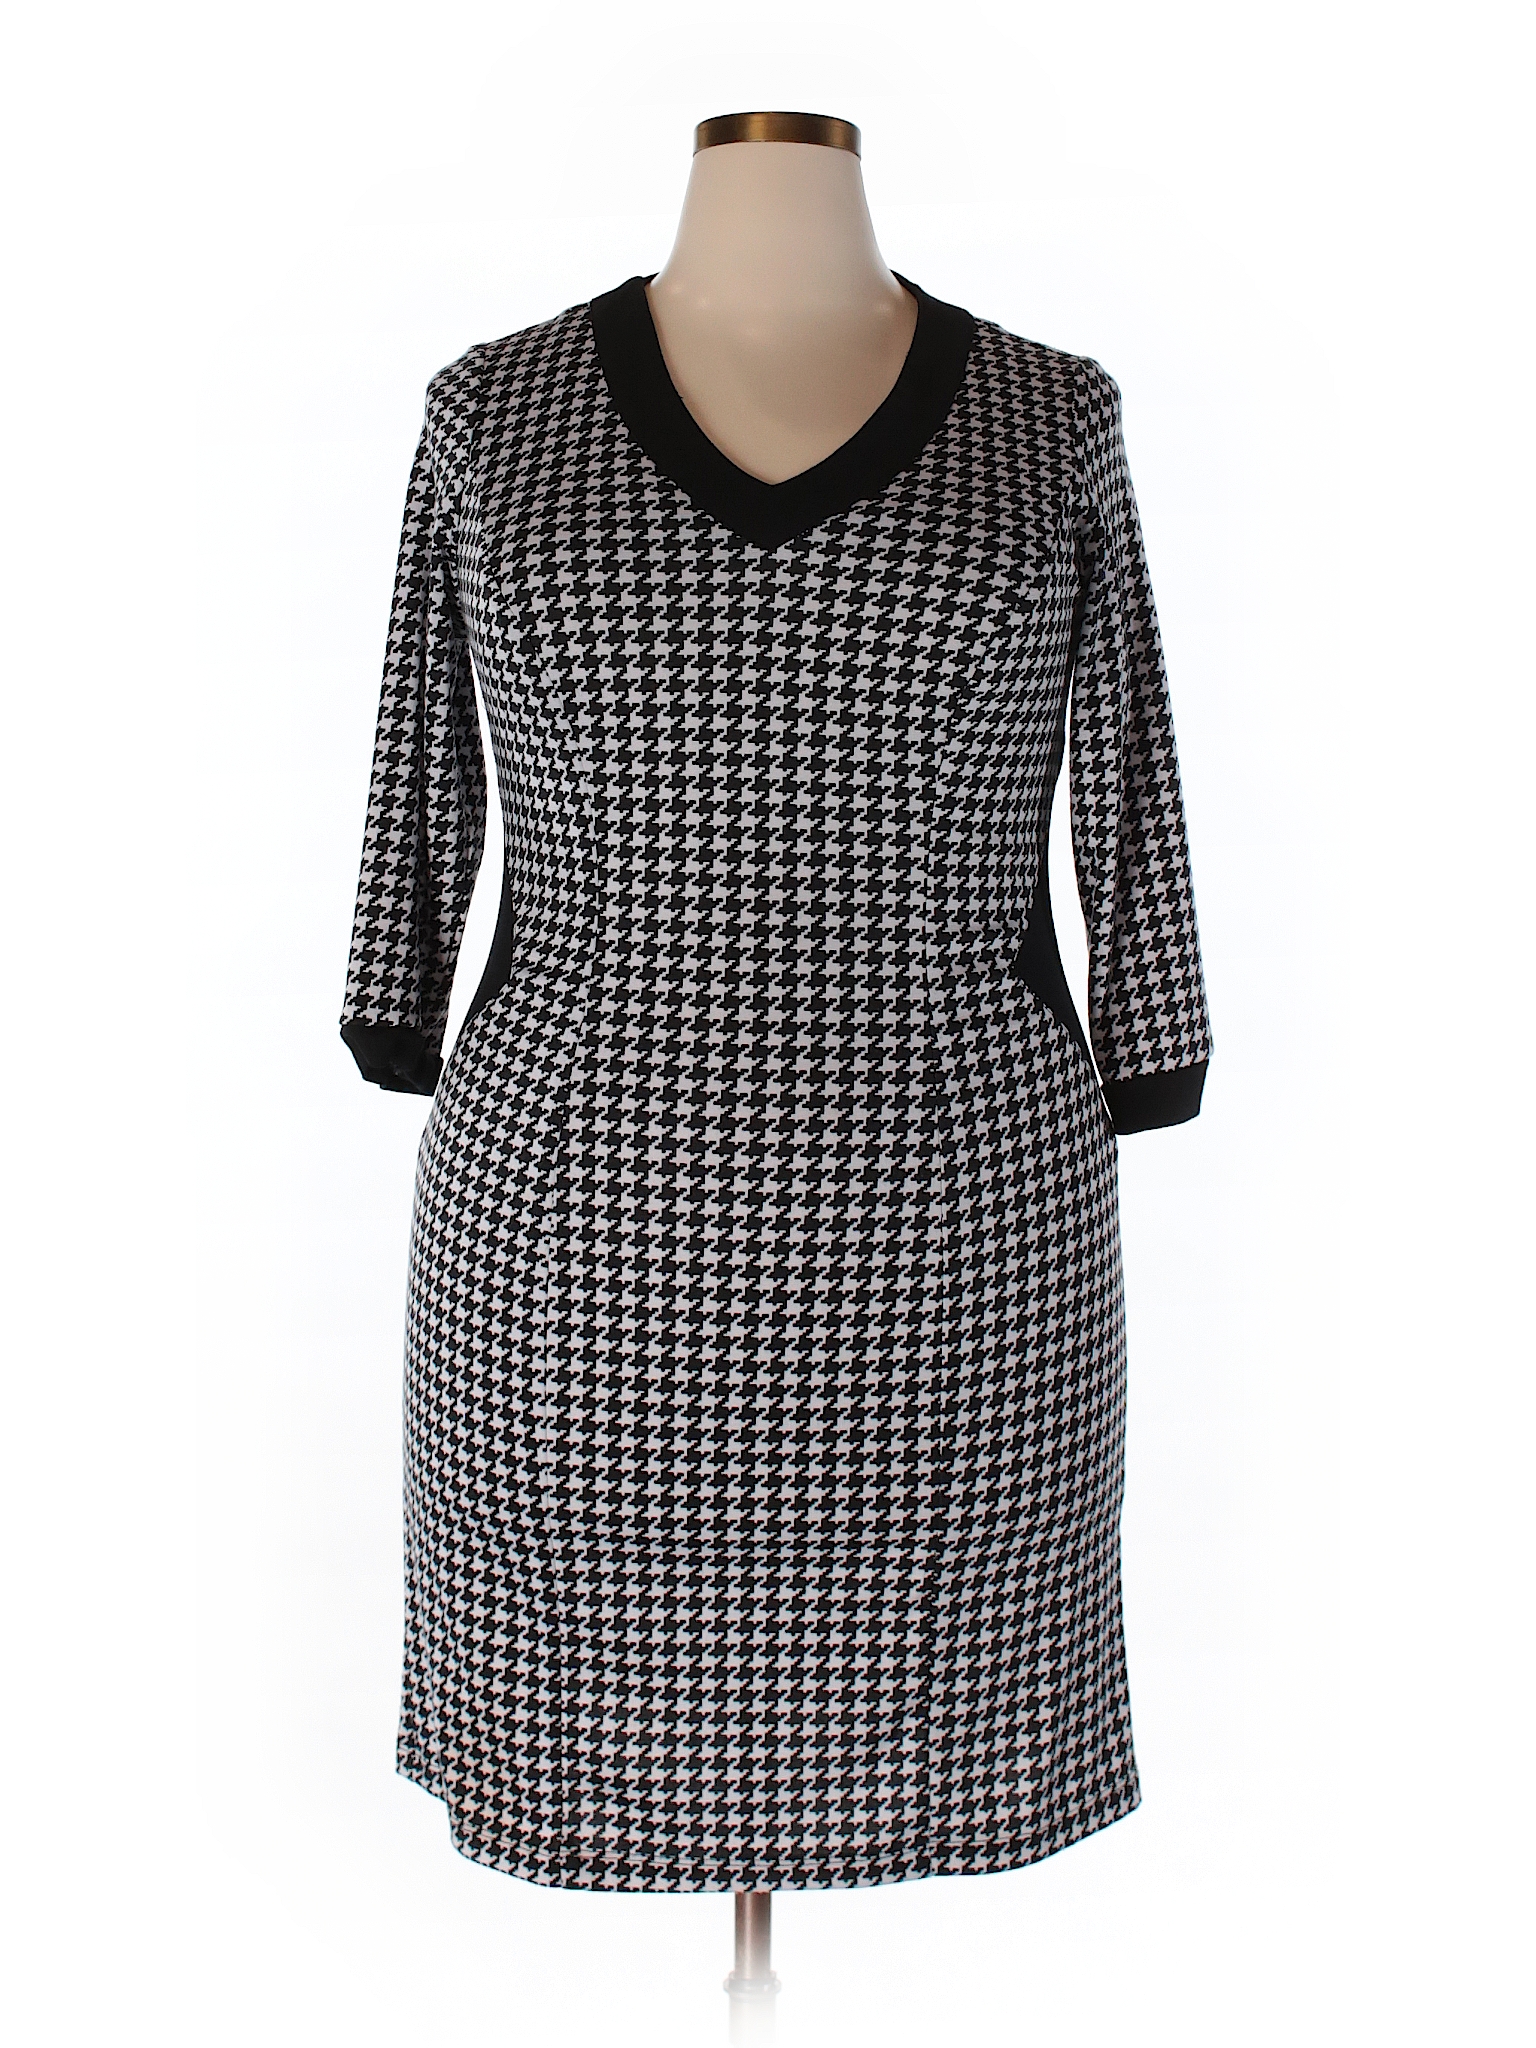 Poppy & Bloom Houndstooth Black Casual Dress Size 1X (Plus) - 75% off ...